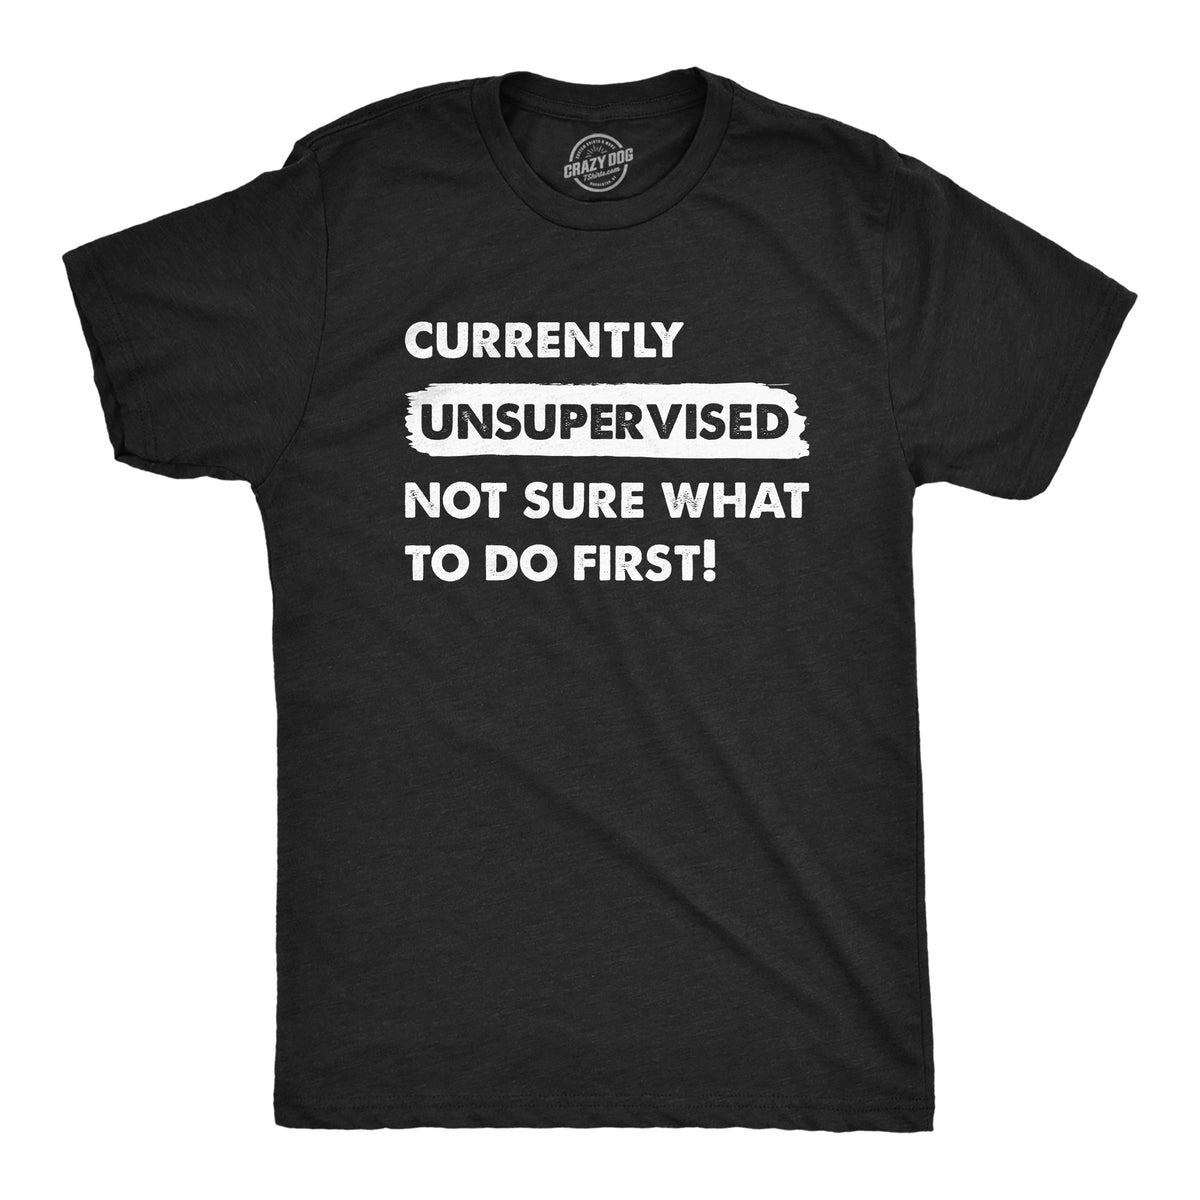 Funny Heather Black - UNSUPERVISED Currently Unsupervised Not Sure What To Do First Mens T Shirt Nerdy Sarcastic Tee